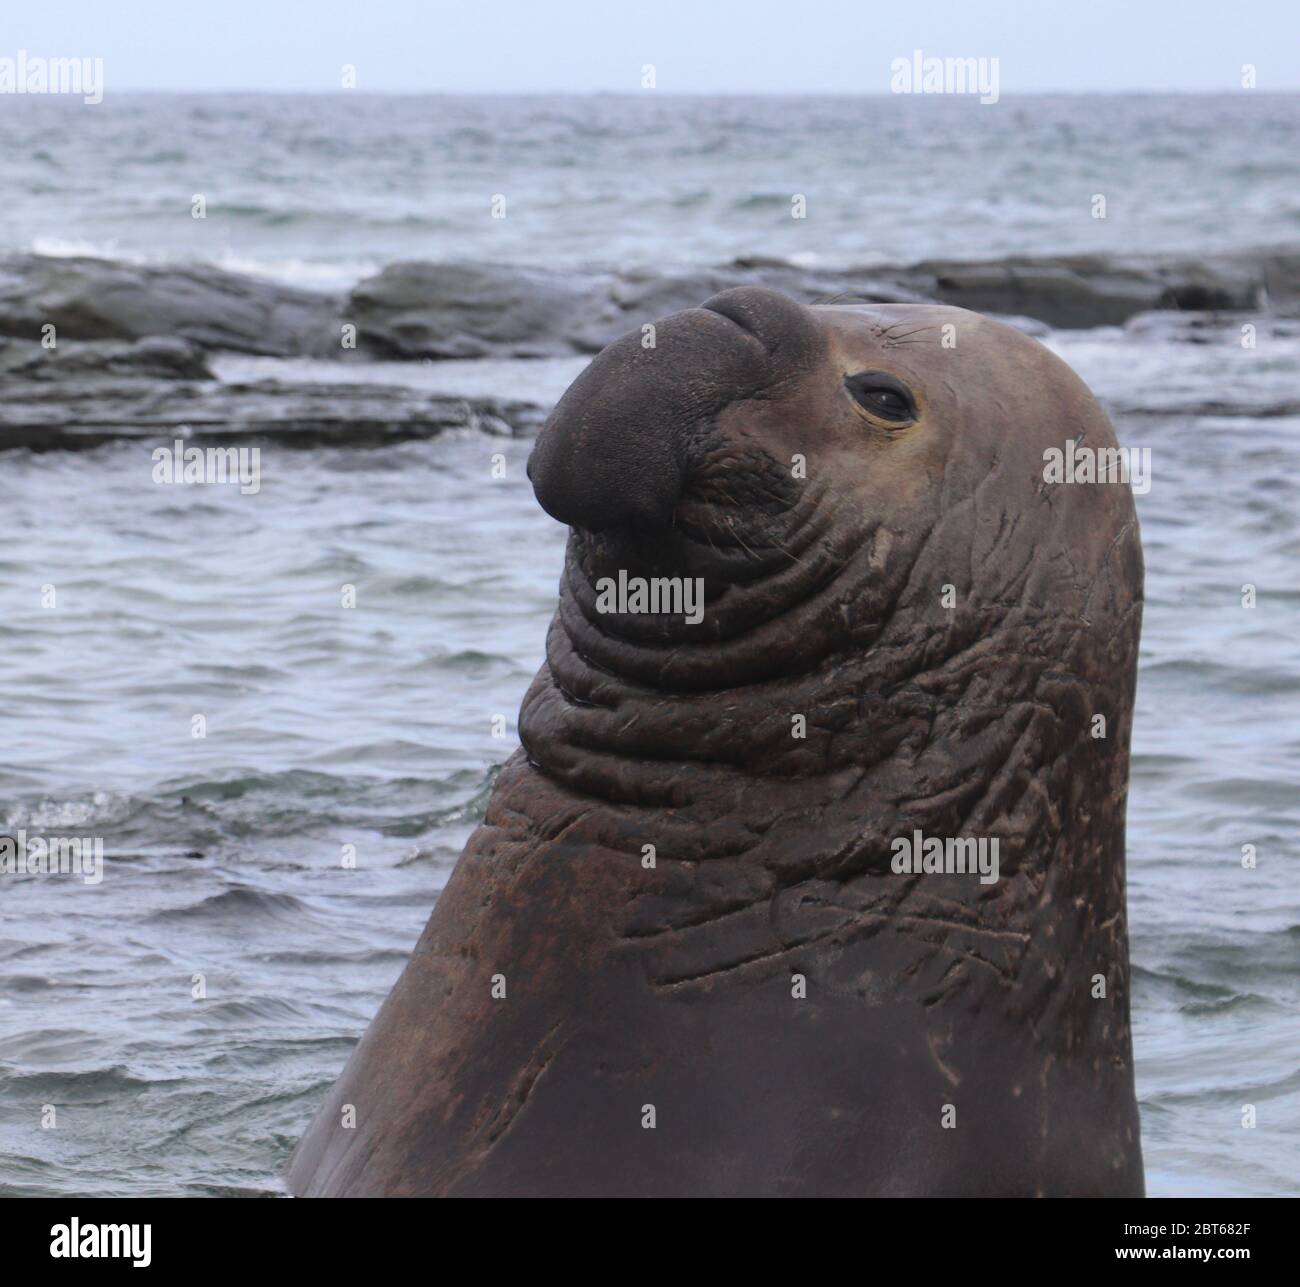 Elephant seal looking curiously at the camera whilst sitting upright in the water Stock Photo